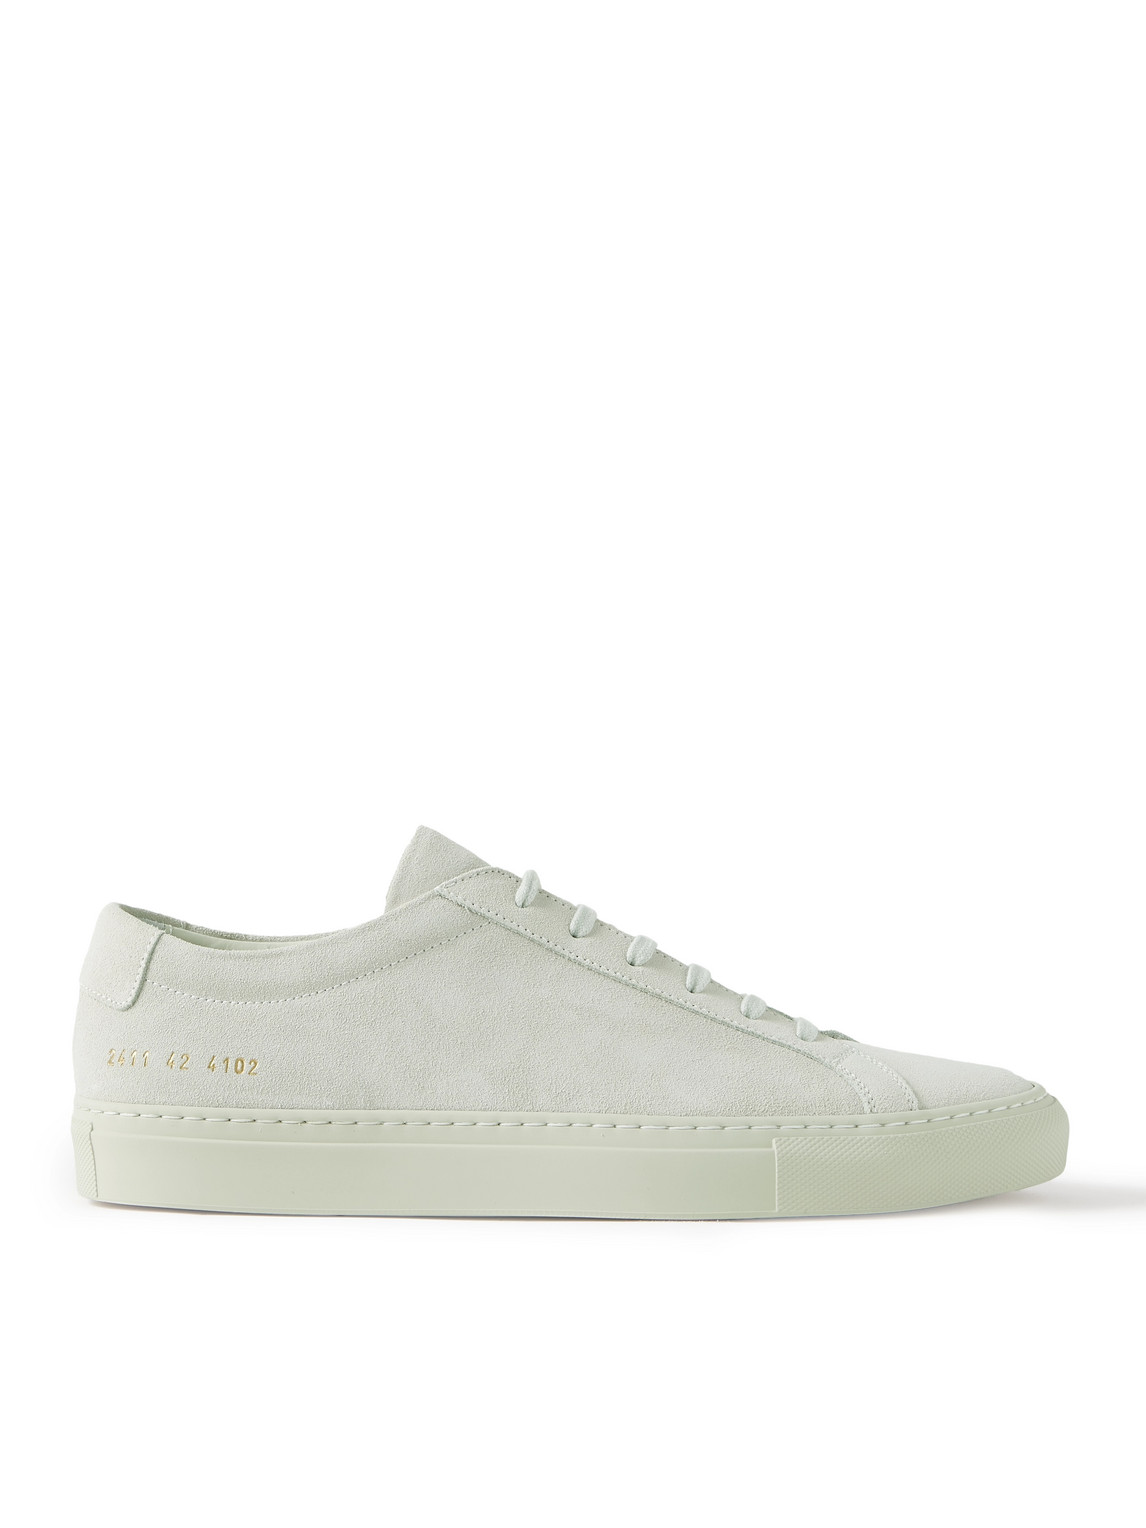 COMMON PROJECTS ORIGINAL ACHILLES SUEDE SNEAKERS